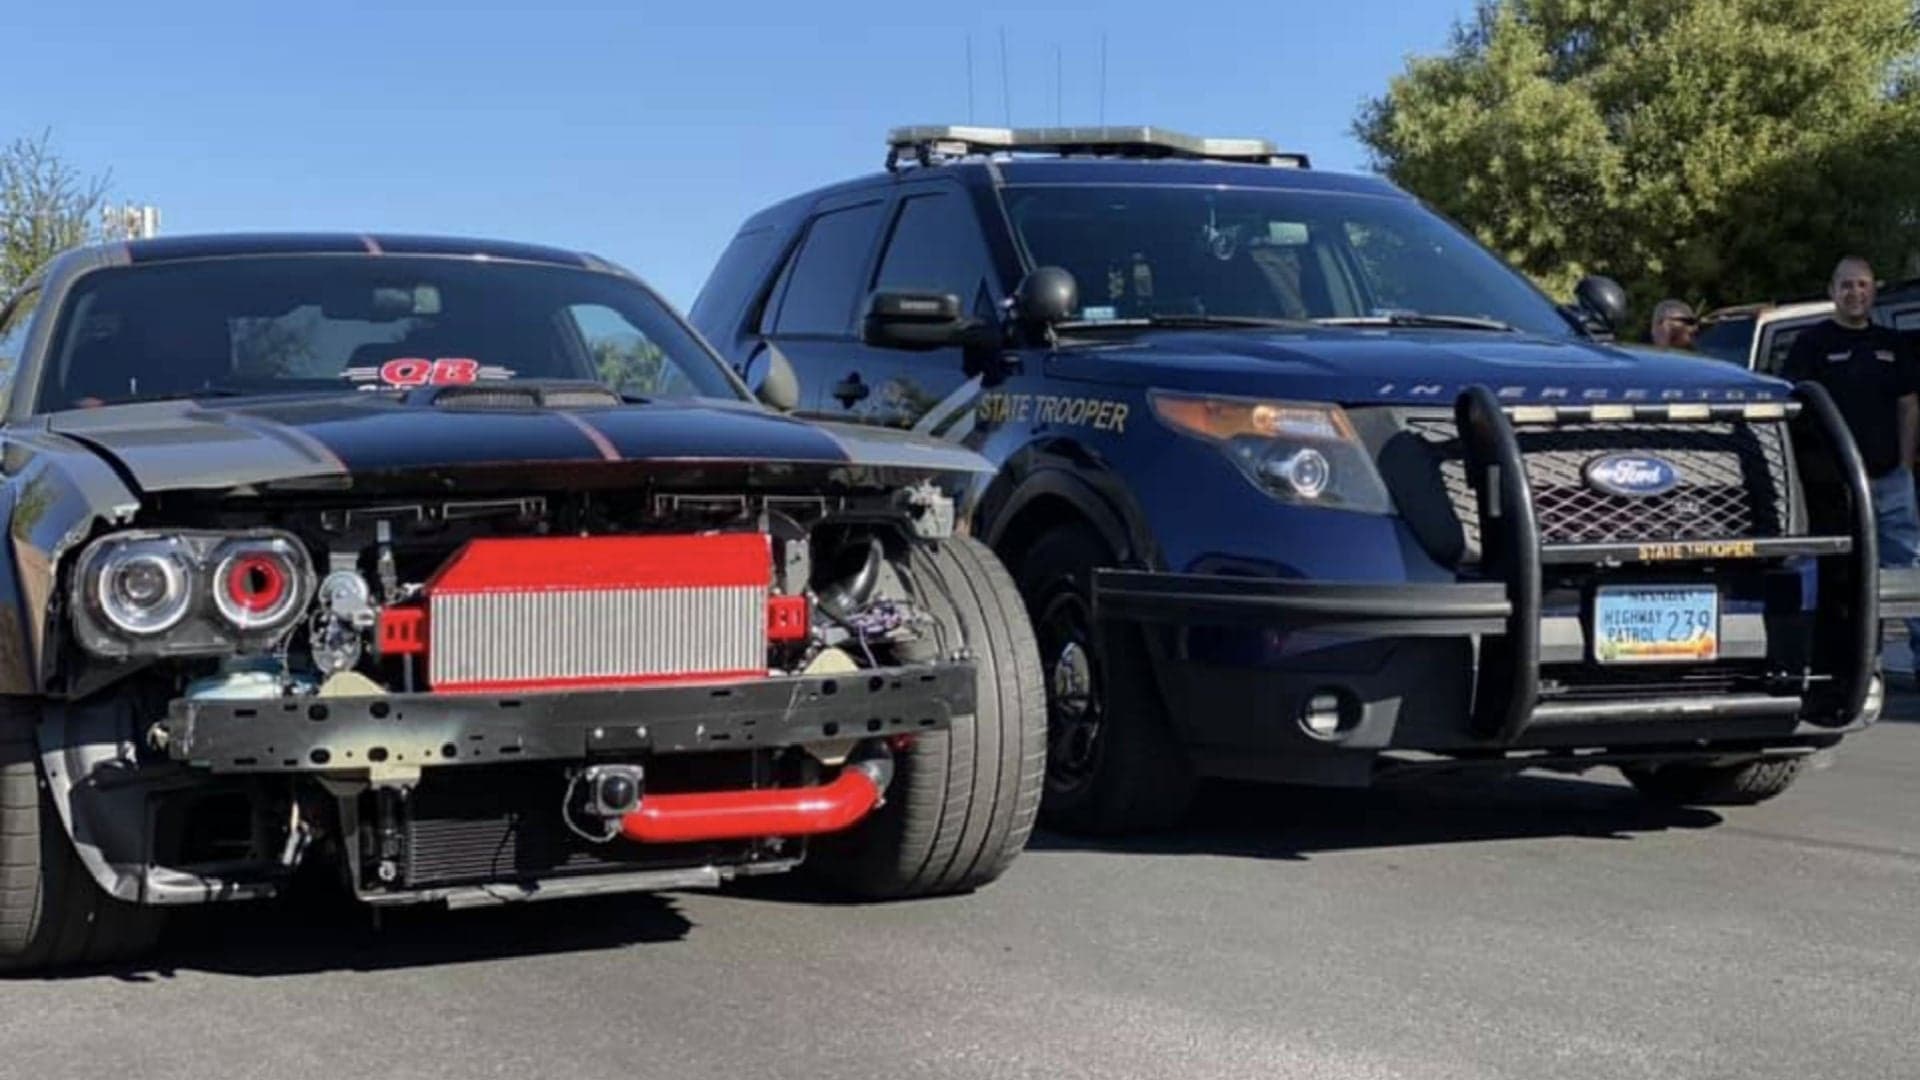 1,000-HP Dodge Challenger SEMA Build Stolen, Rammed Into Police Car Days Ahead of Show